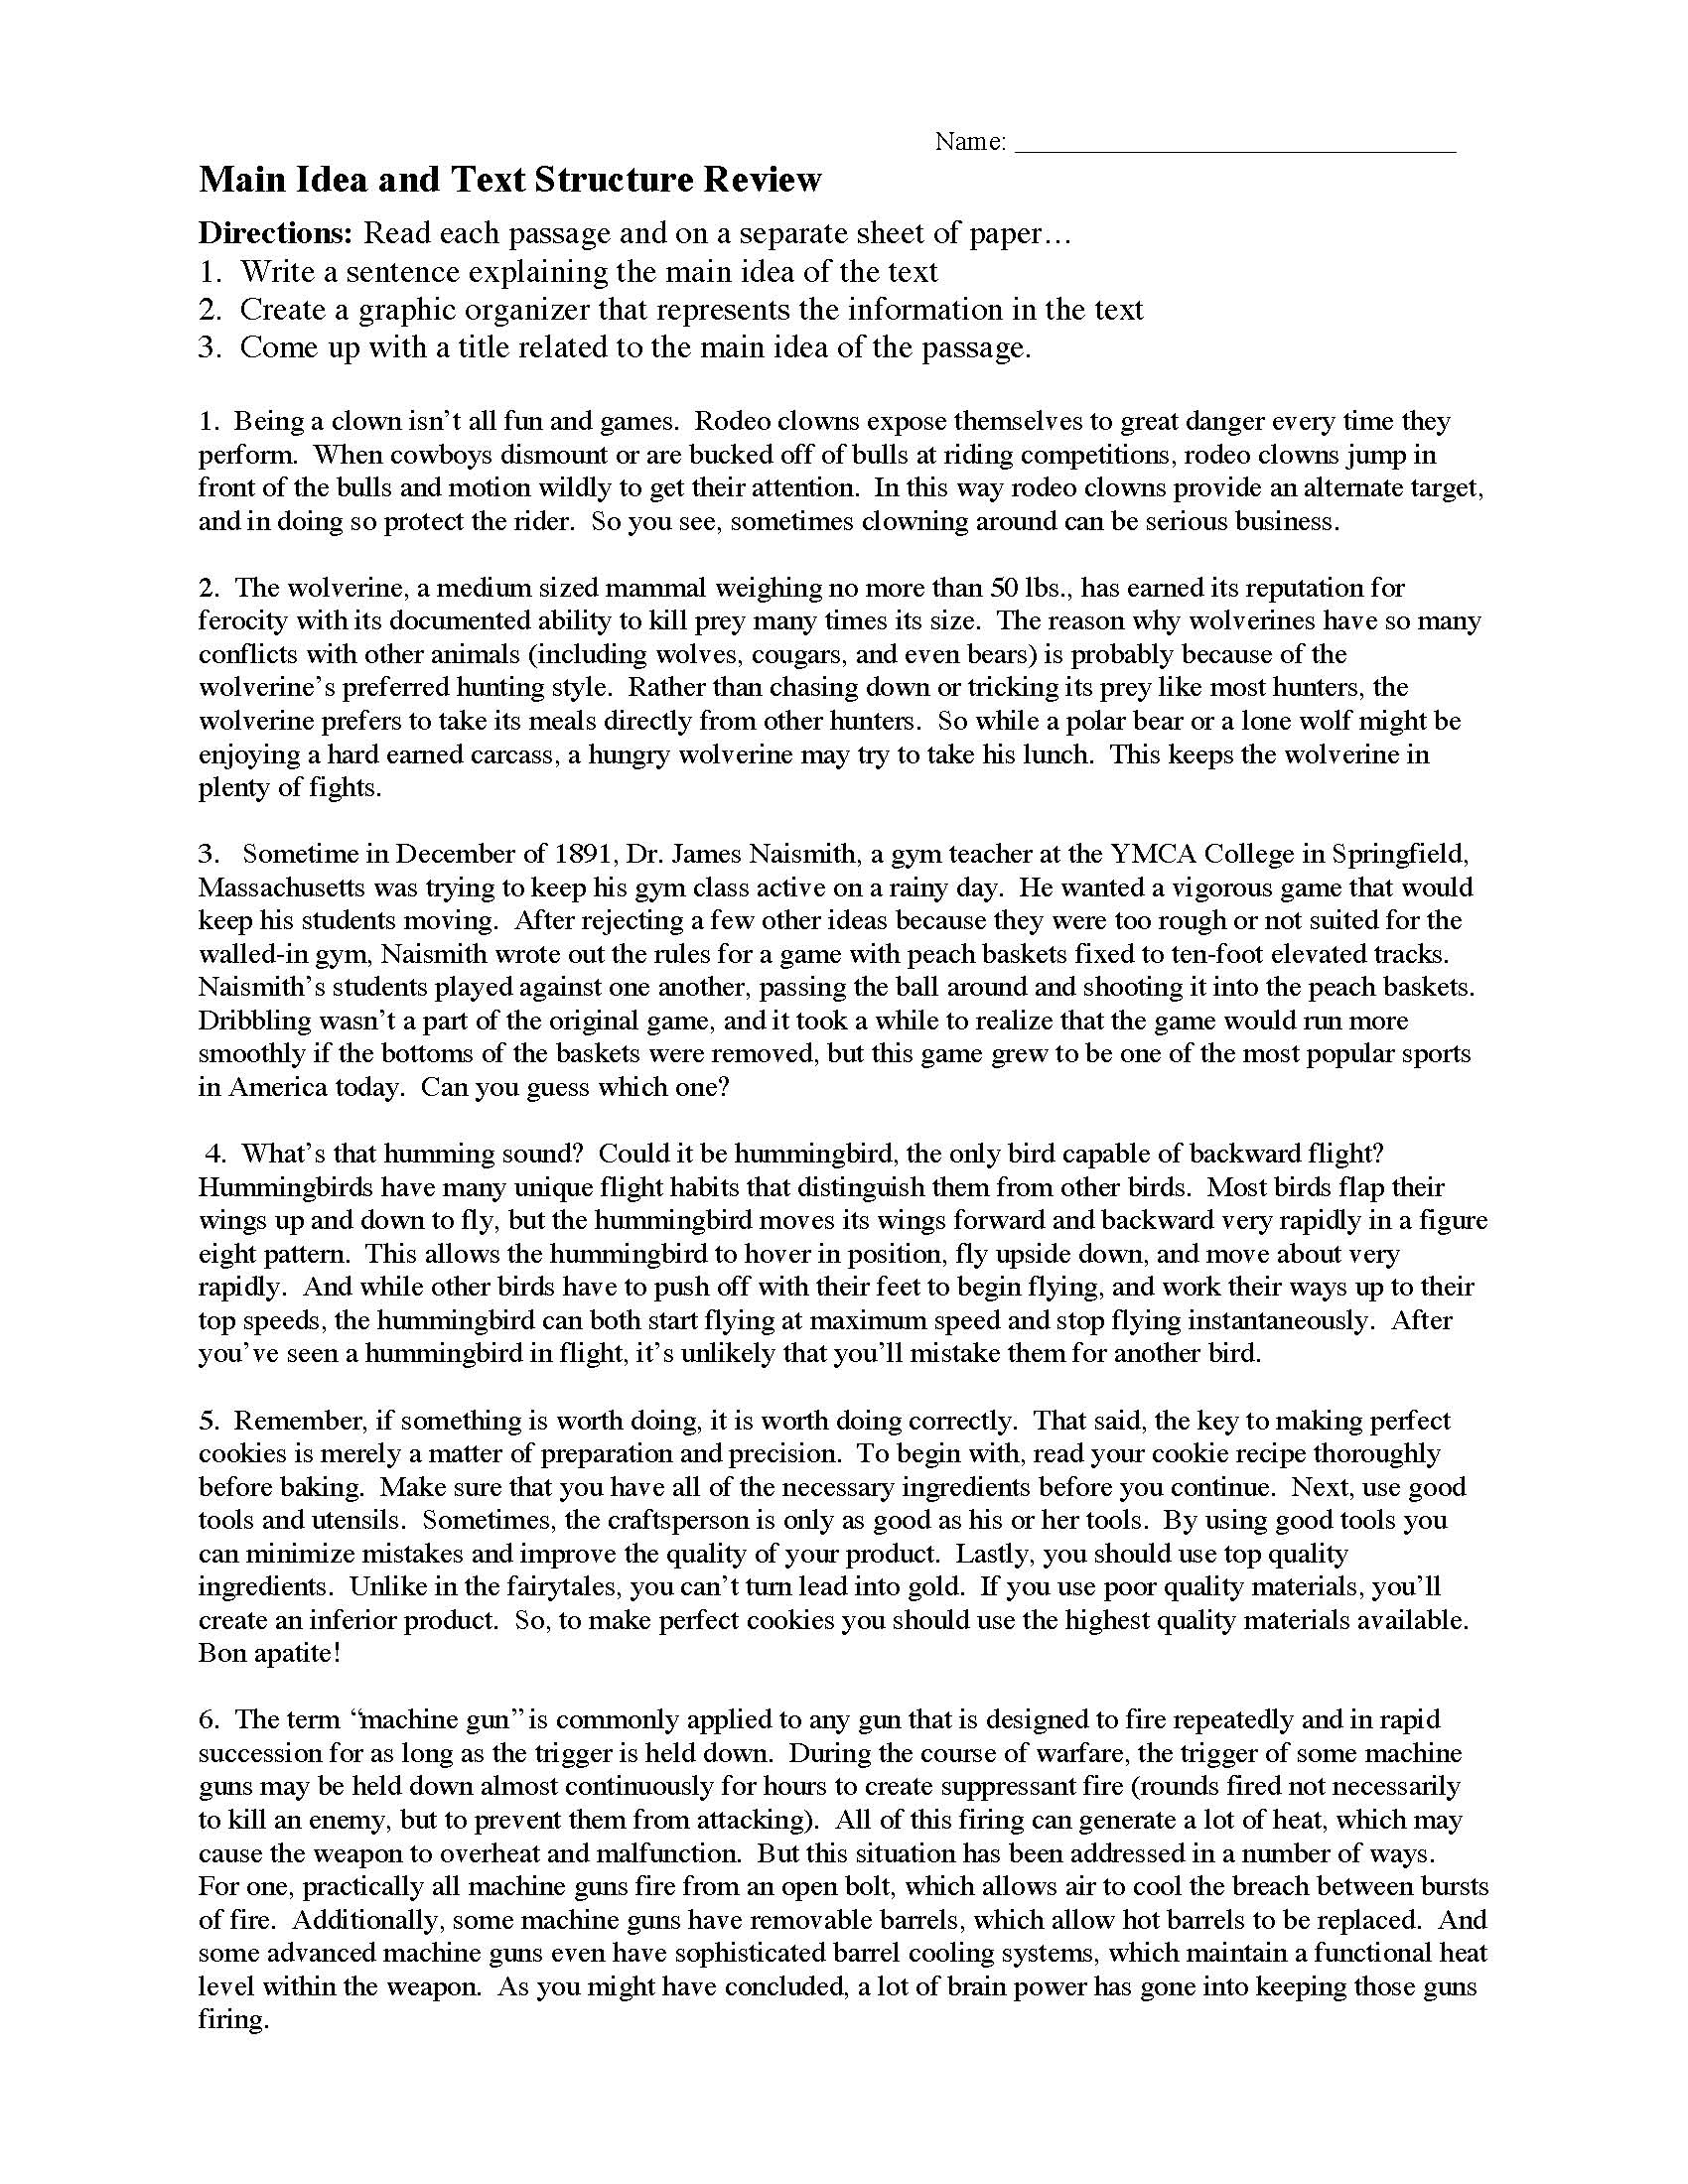 This is a preview image of Main Idea and Text Structure Worksheet 4. Click on it to enlarge it or view the source file.